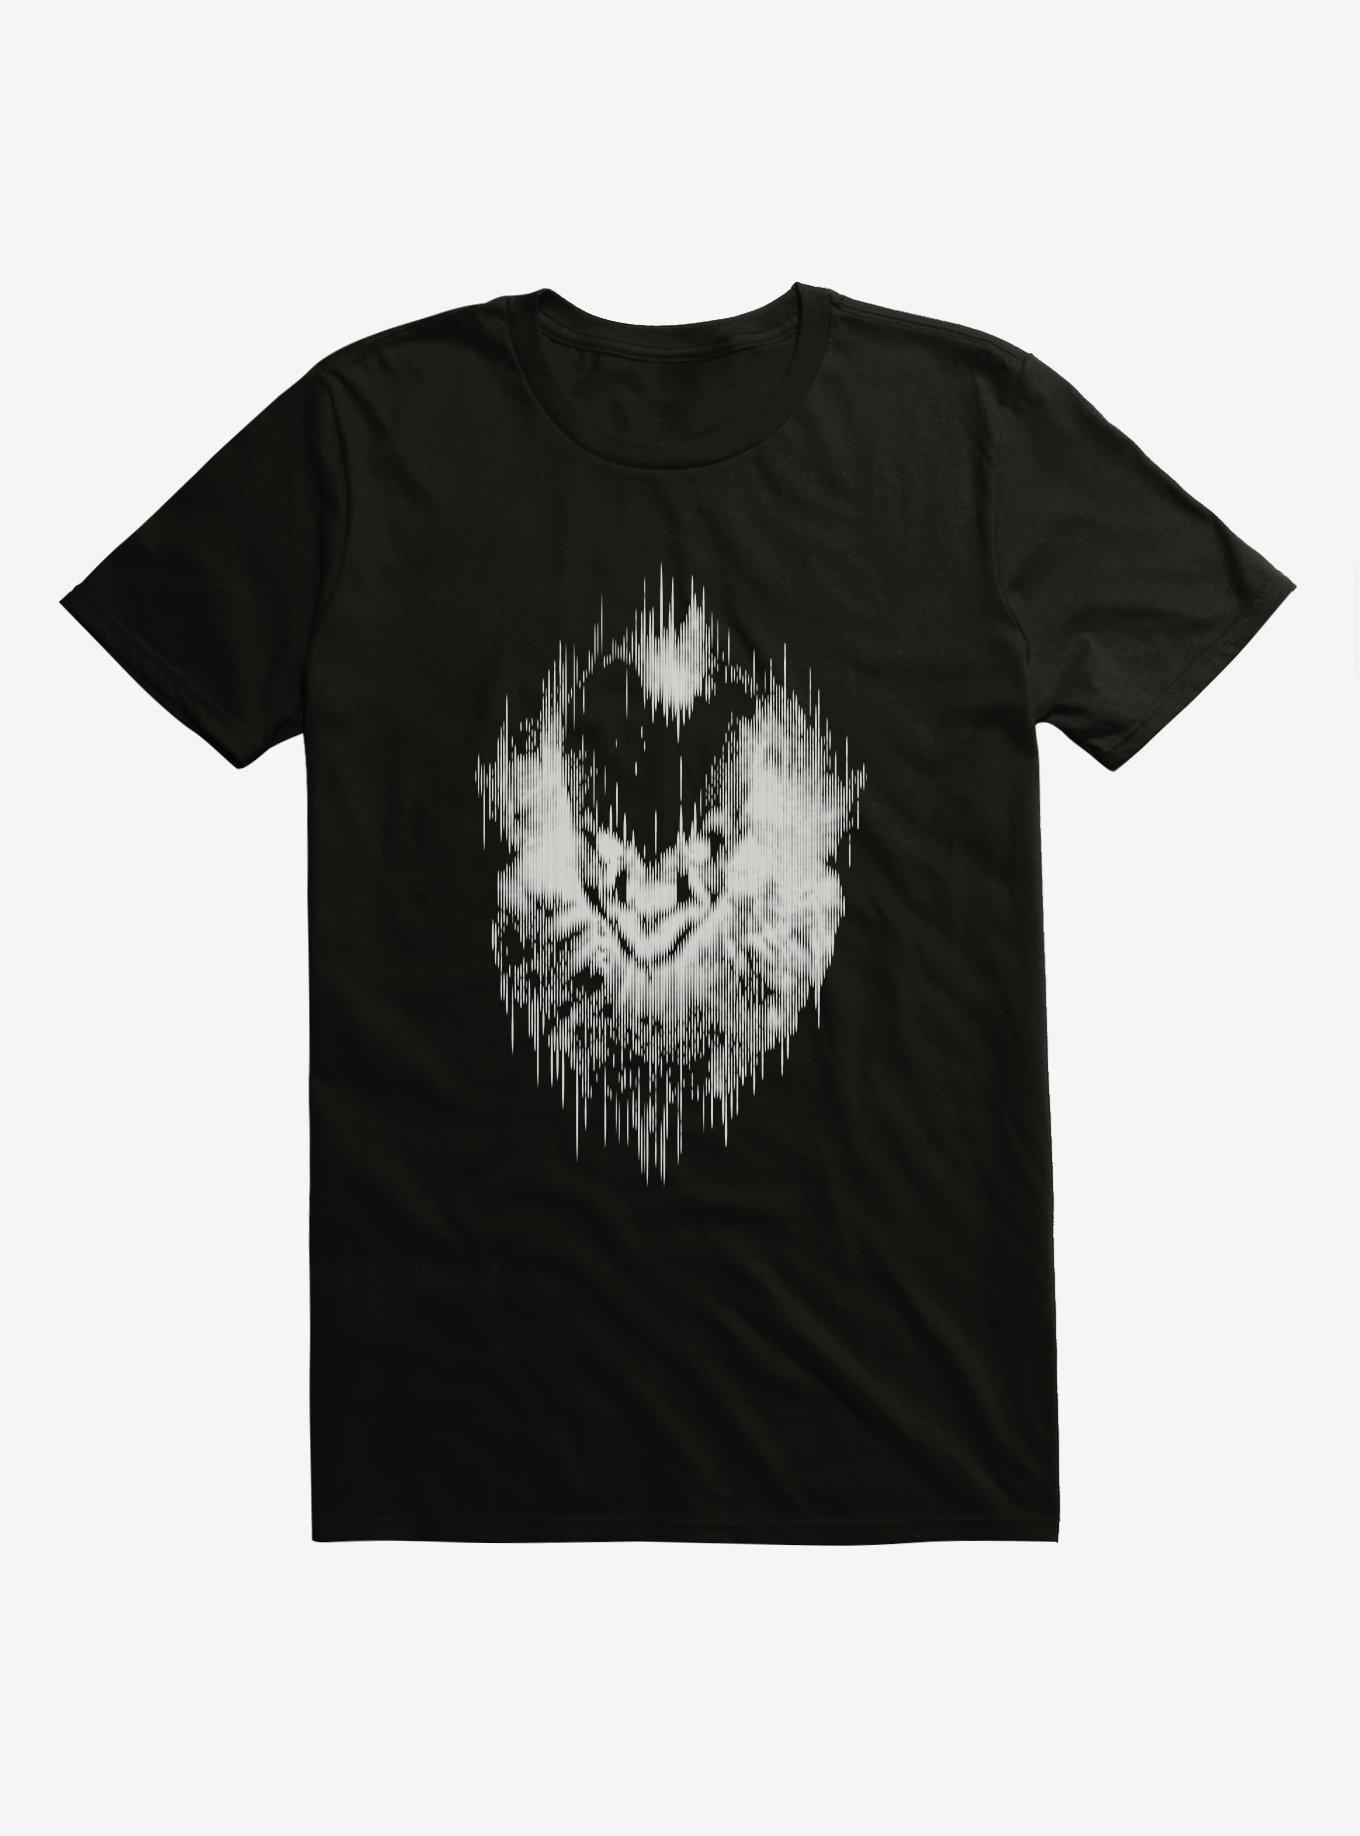 IT Chapter Two Pennywise Static Outline T-Shirt, BLACK, hi-res